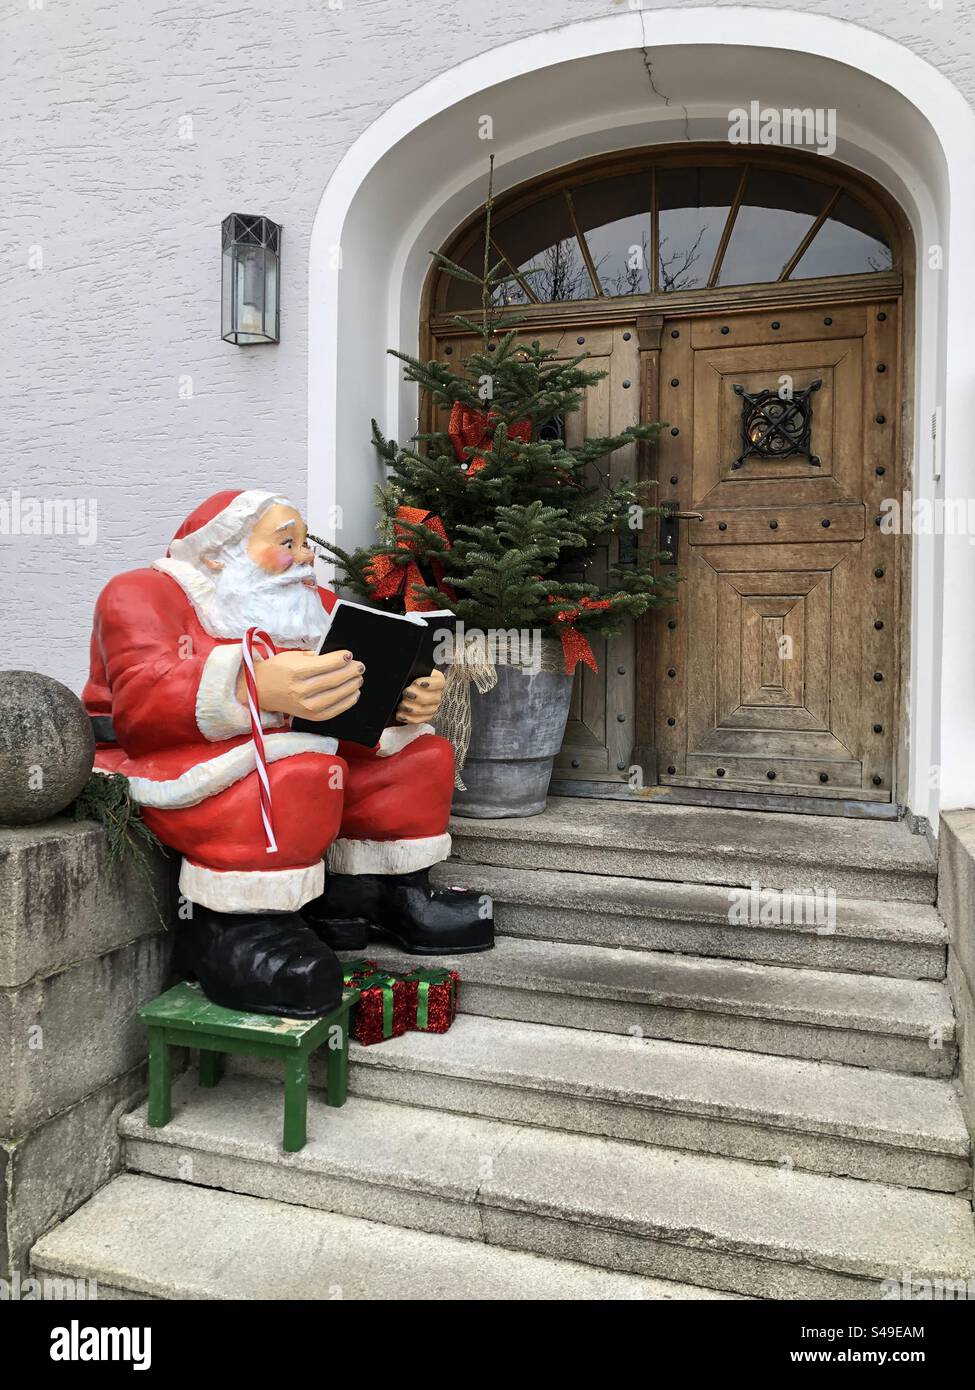 Santa Claus figure sitting on a staircase in front of an old wooden entrance door Stock Photo